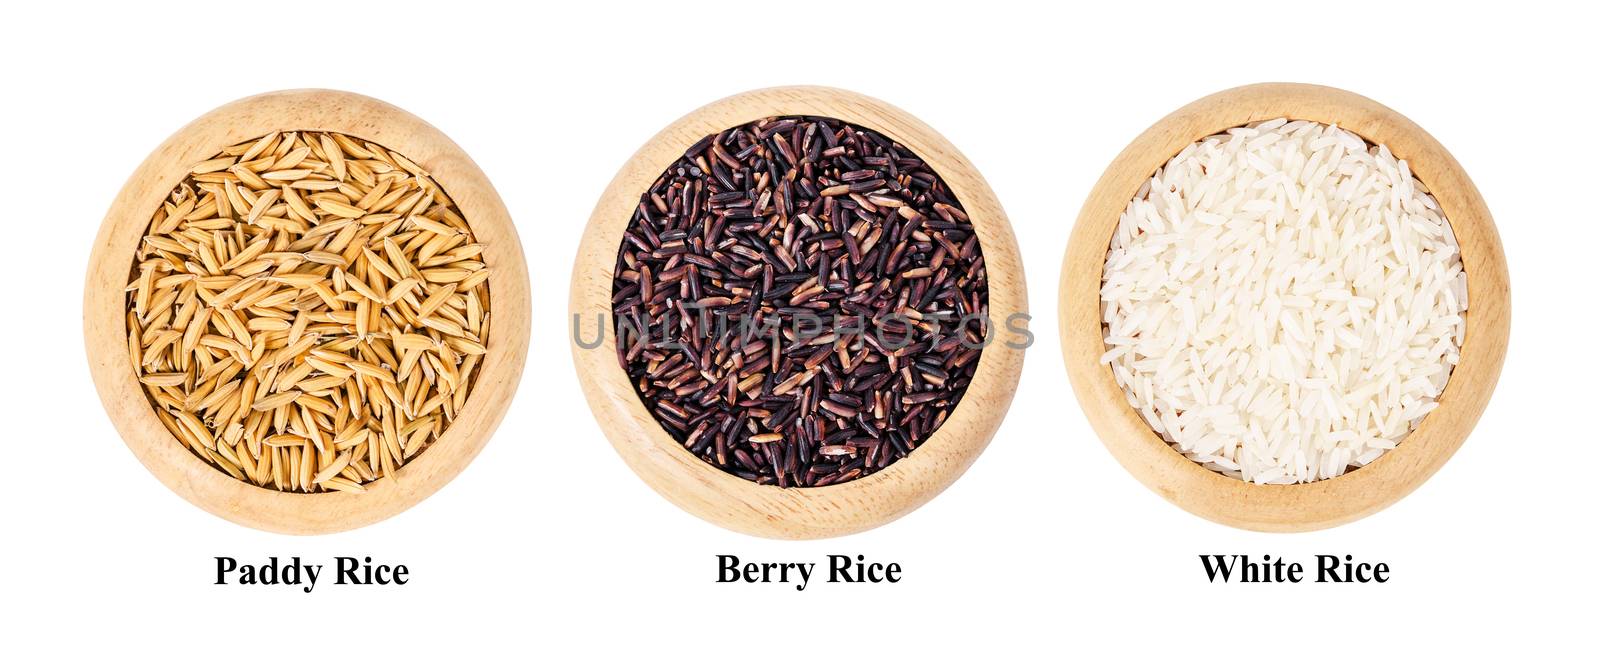 Different of berry rice, Paddy, and white rice in wooden dish isolated on white background.